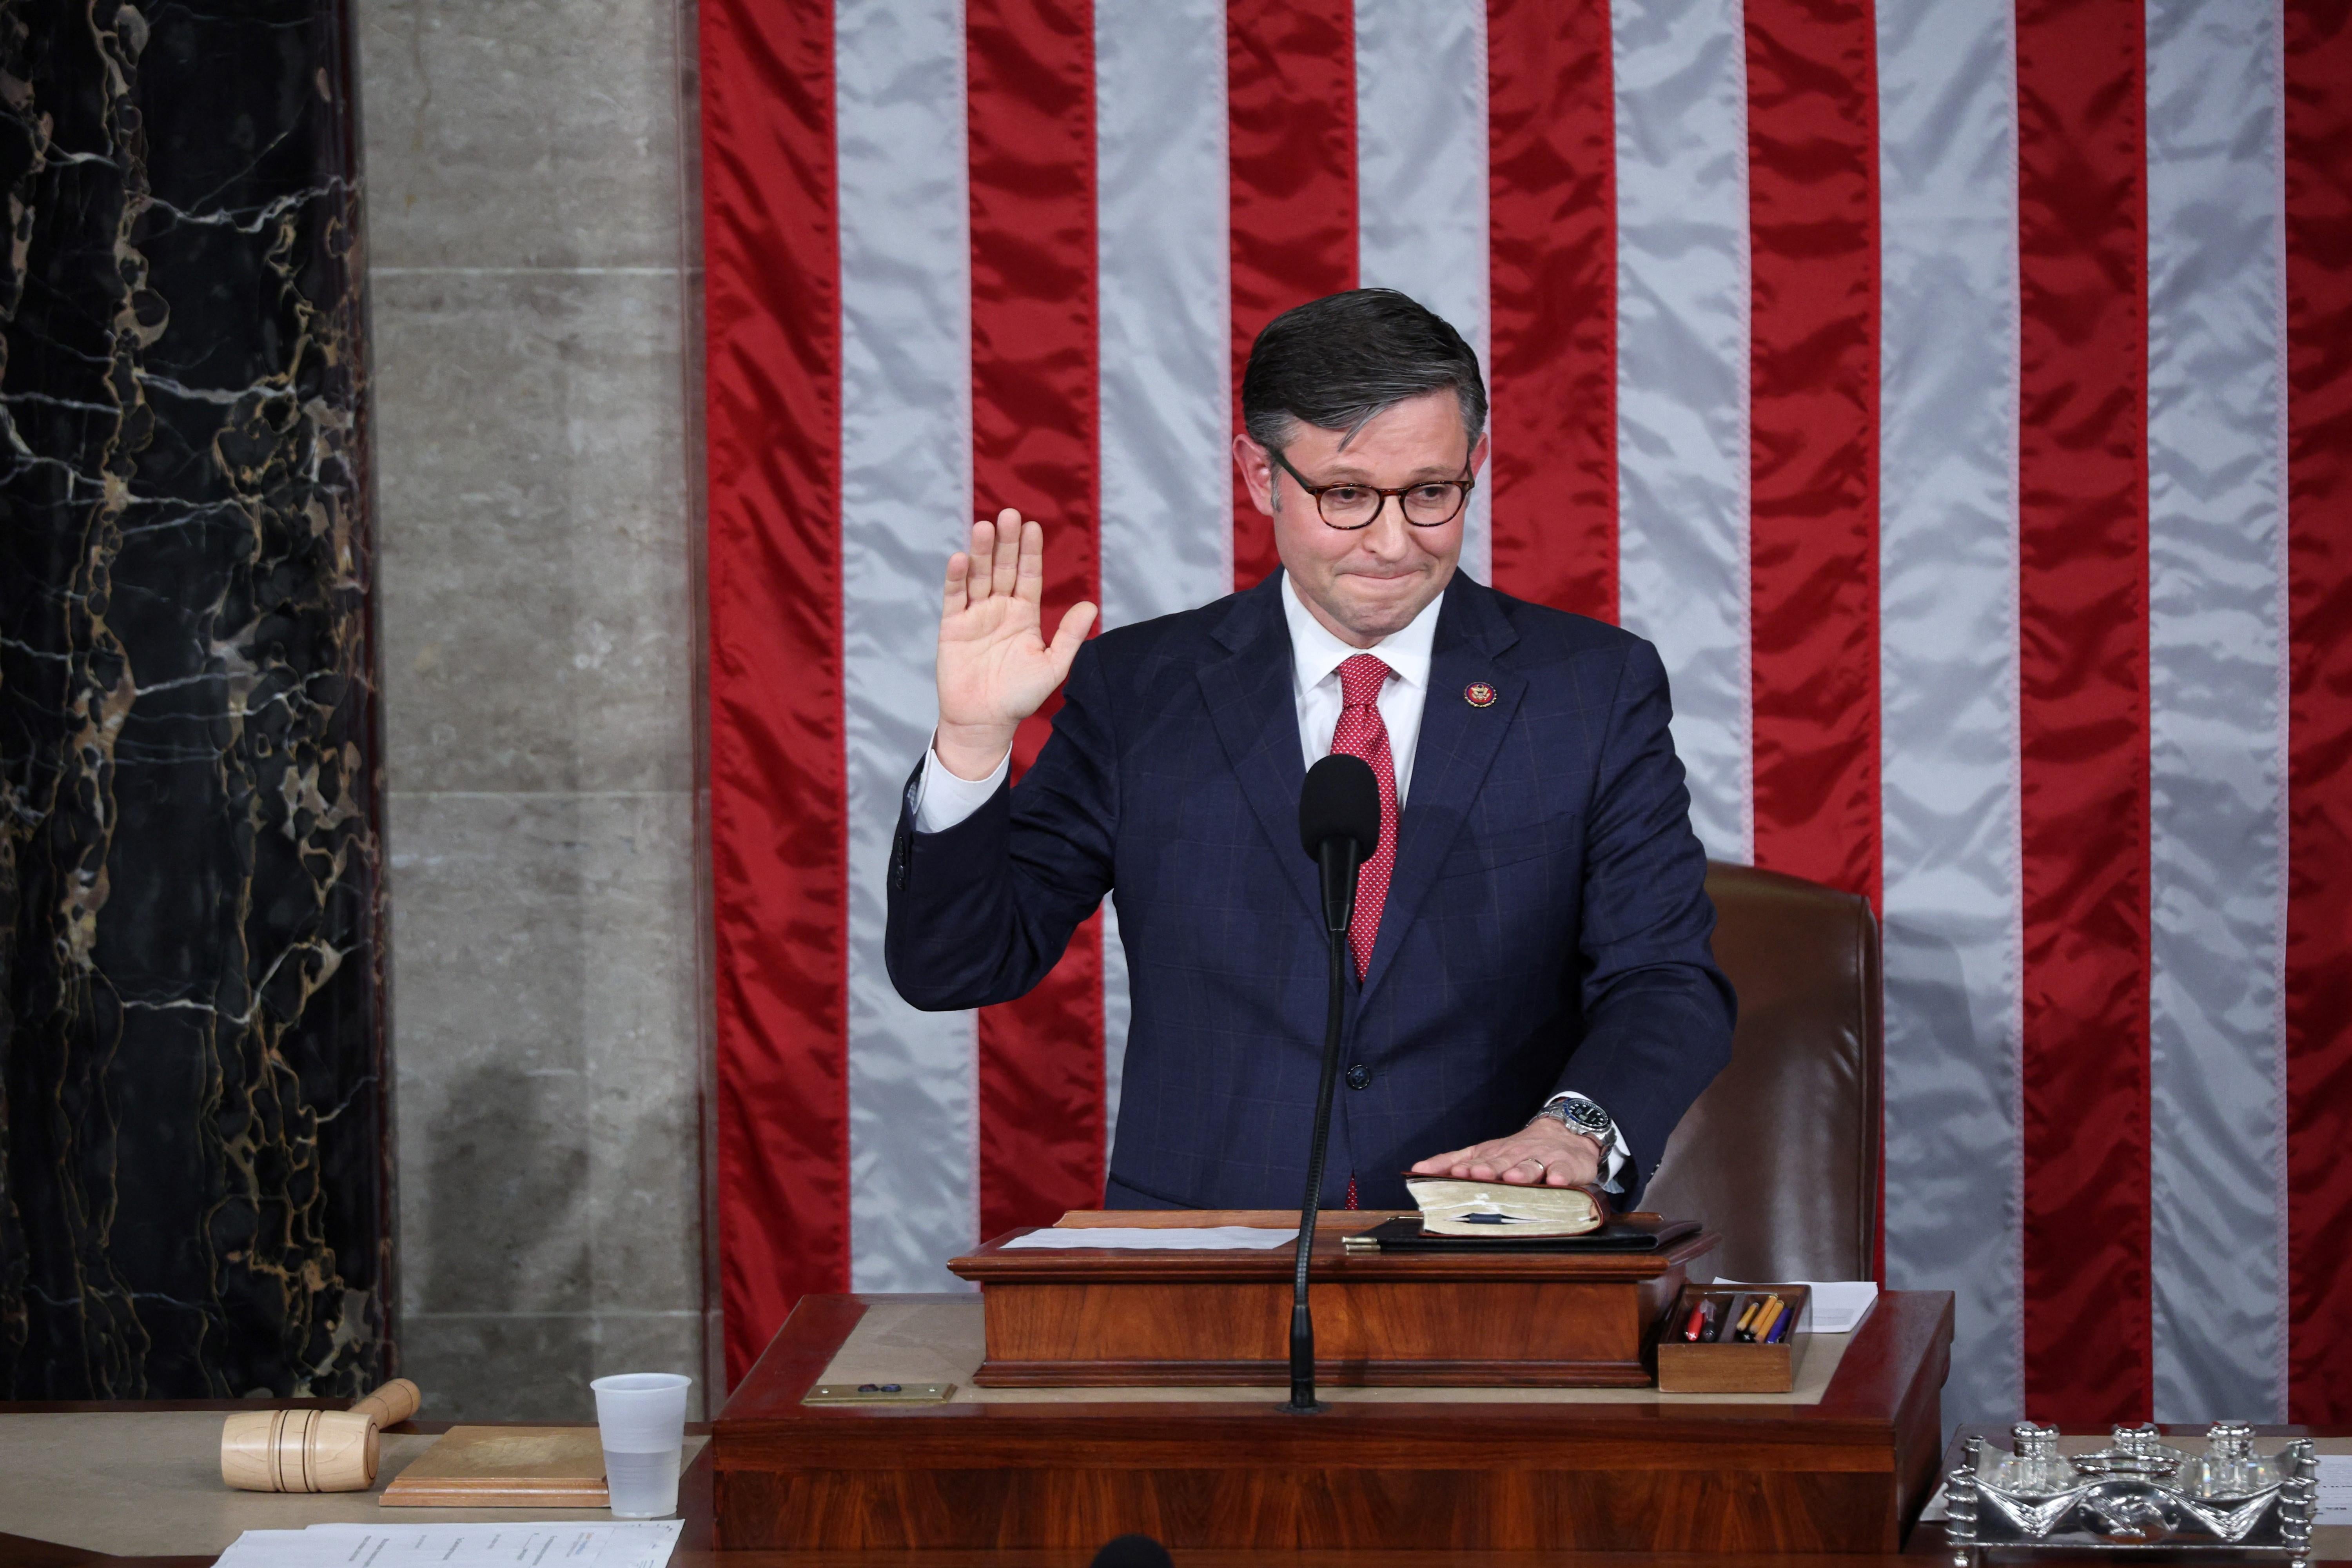 Mike Johnson places one hand on a book and raises his other hand while standing in front of a flag on the dais in the U.S. Capitol.